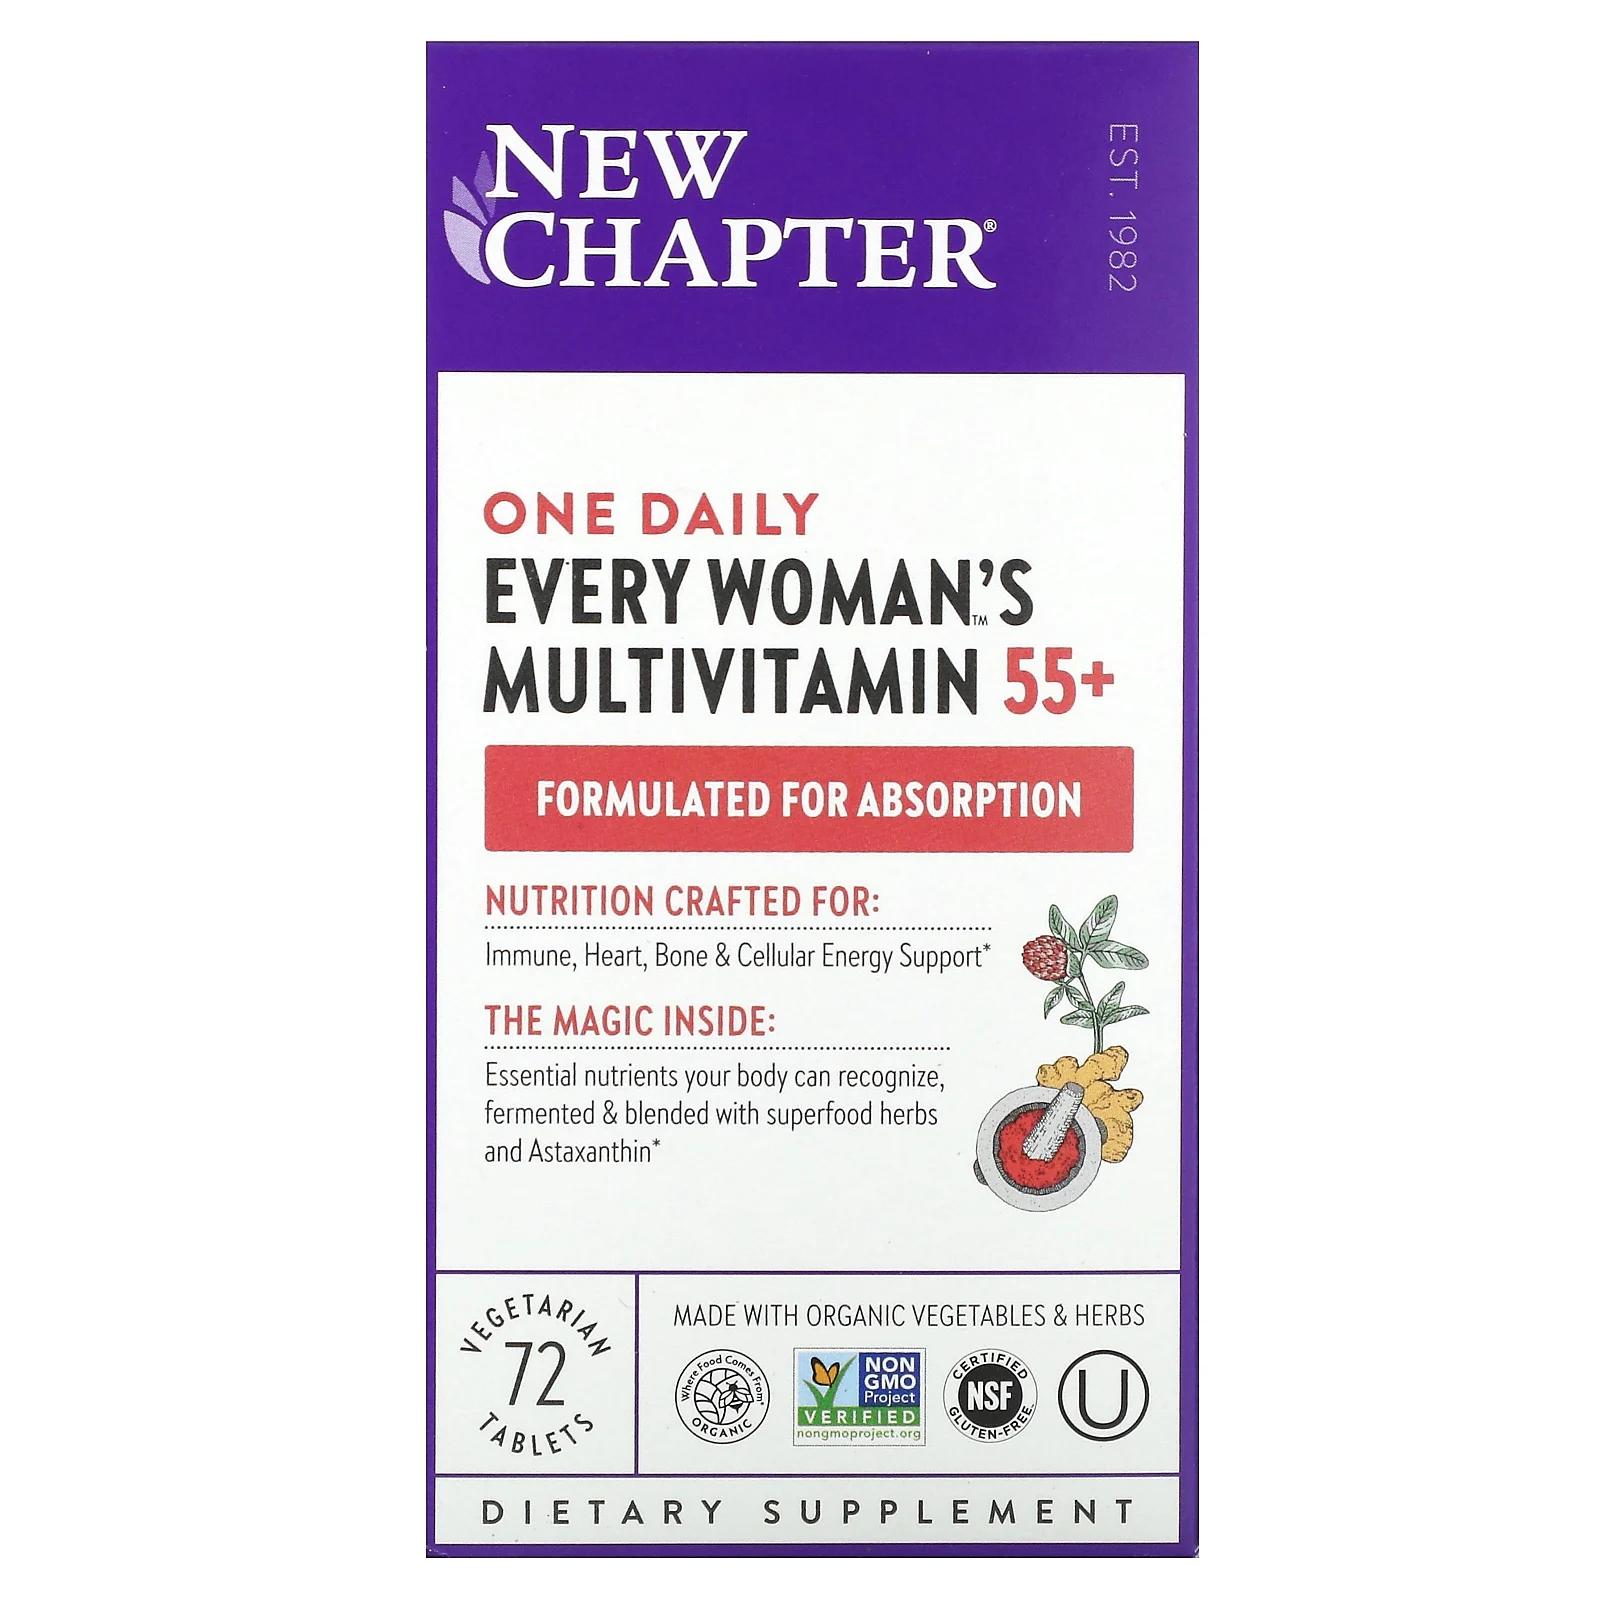 New Chapter Every Woman's One Daily 55+ Multi 72 Veggie Tabs